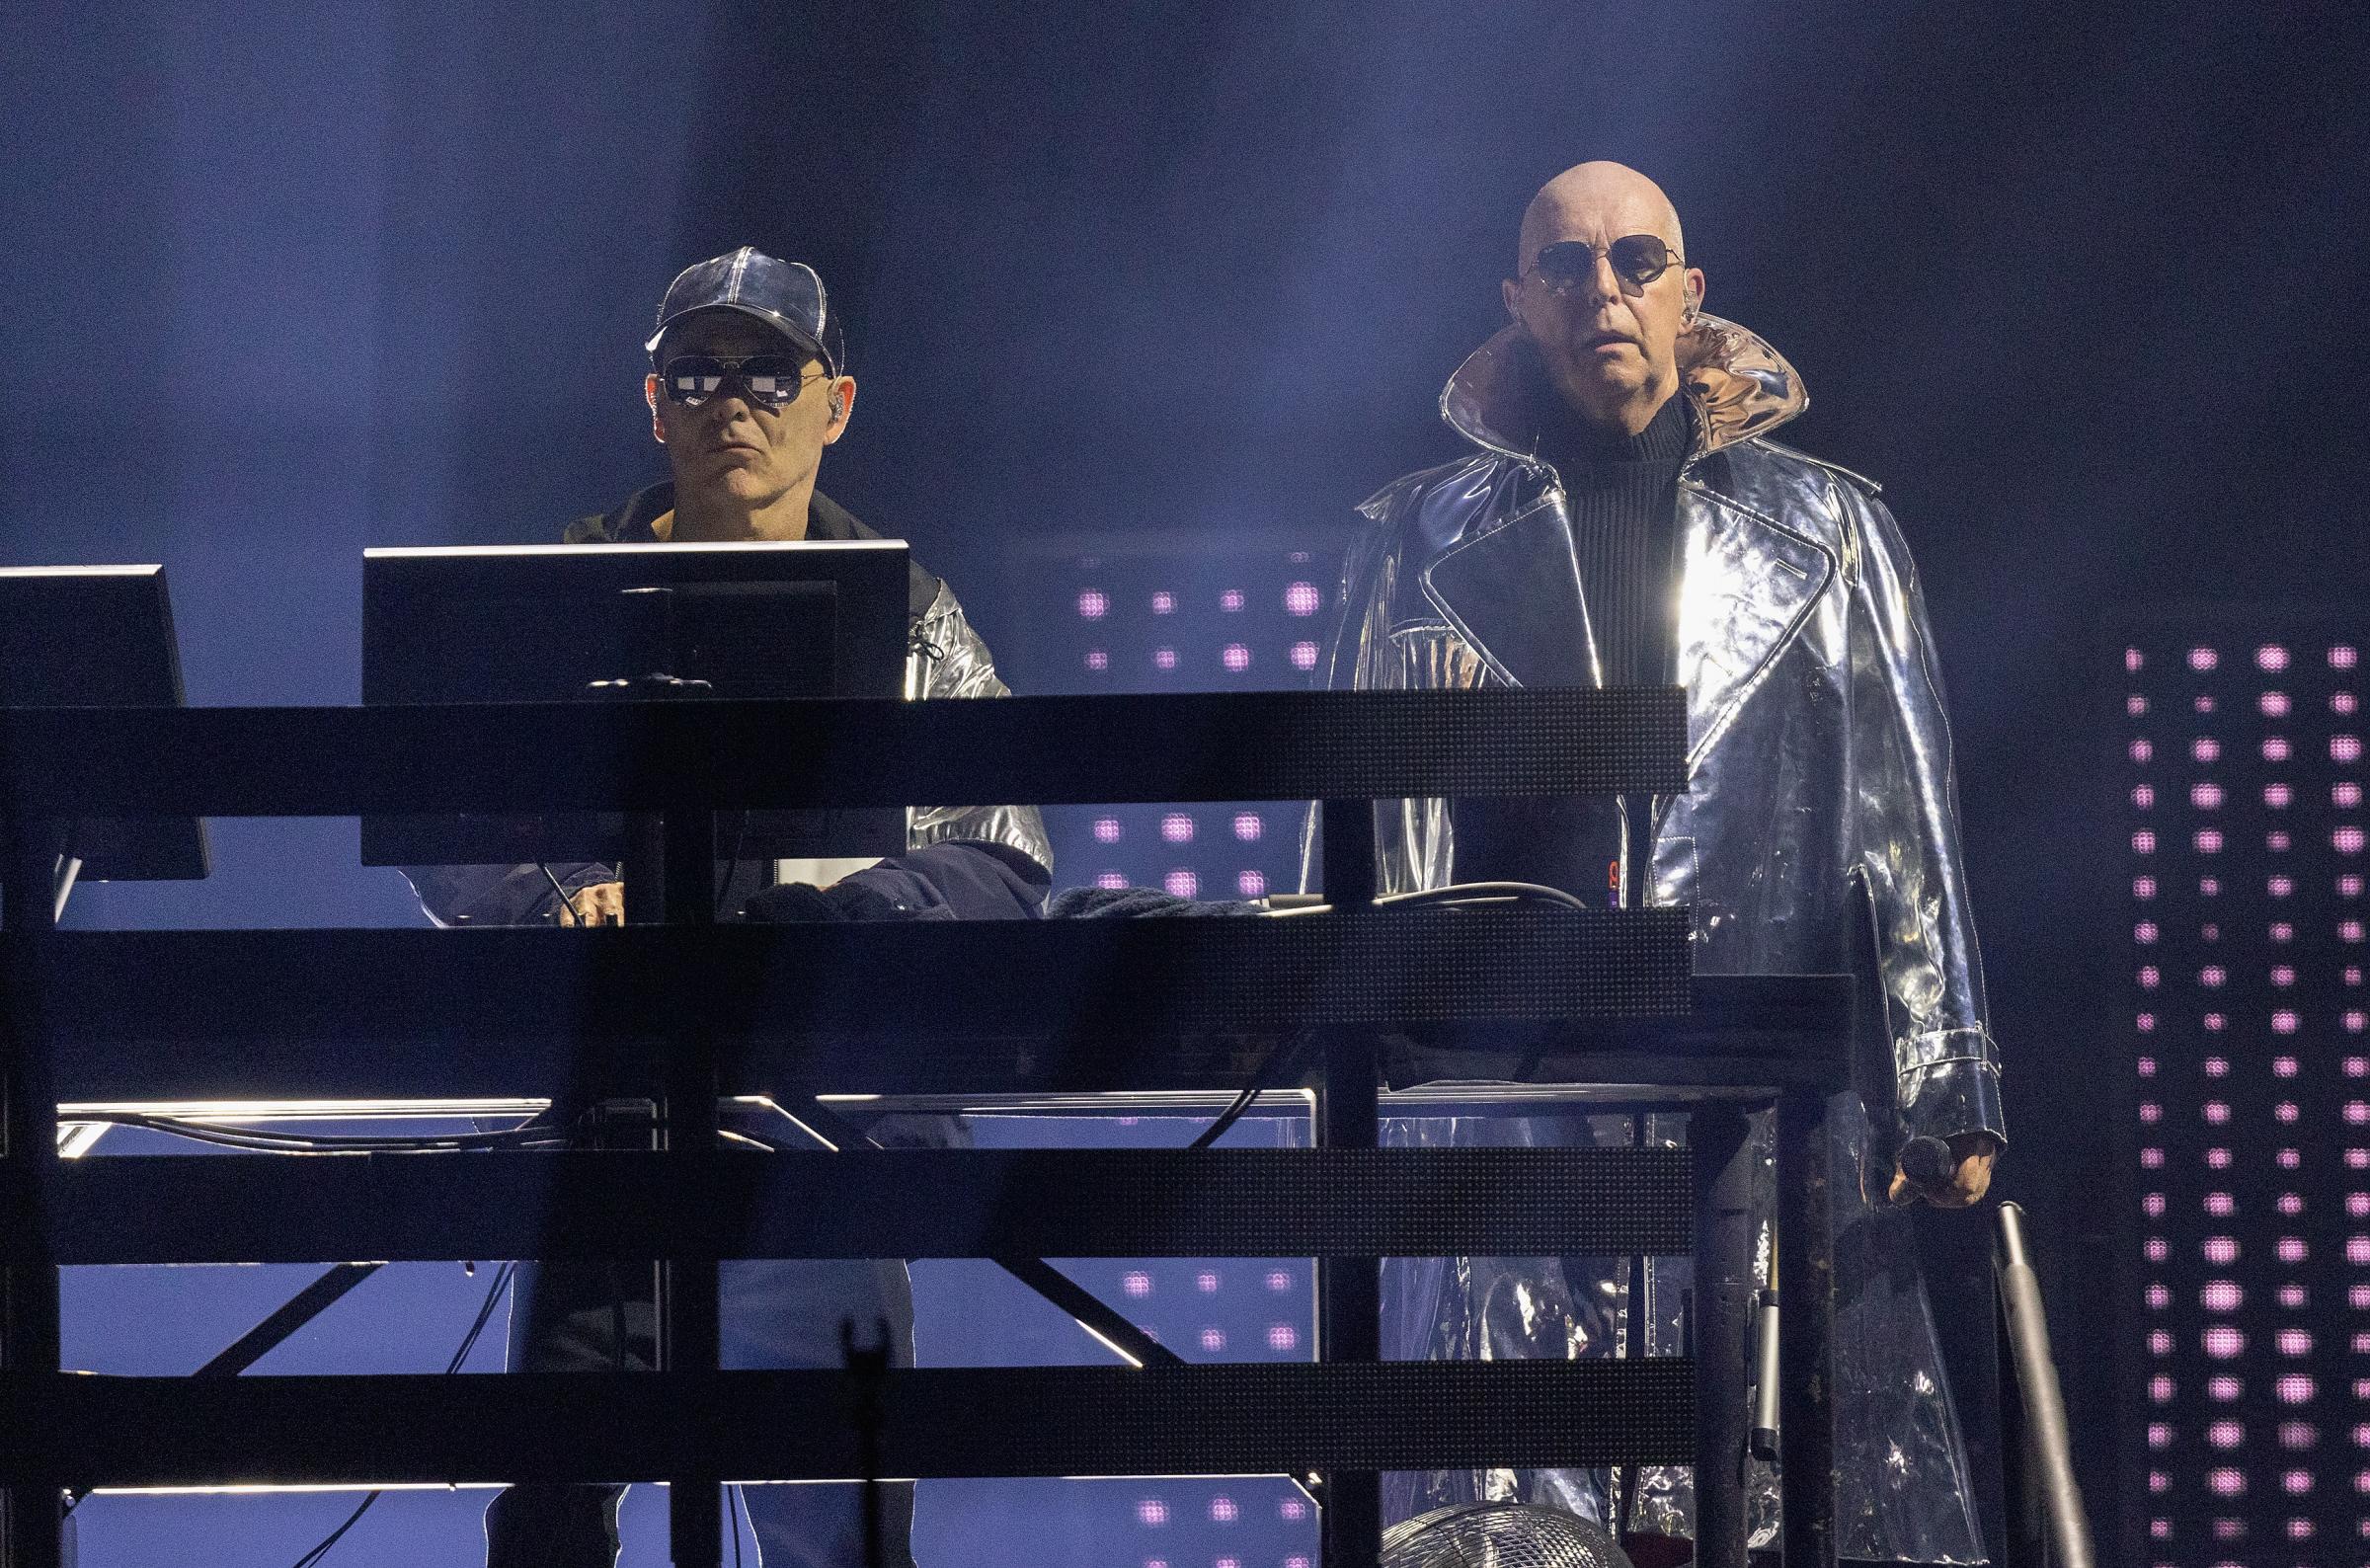 Neil Tennant (right) and Chris Lowe from Pet Shop Boys performing on stage. Picture: PA